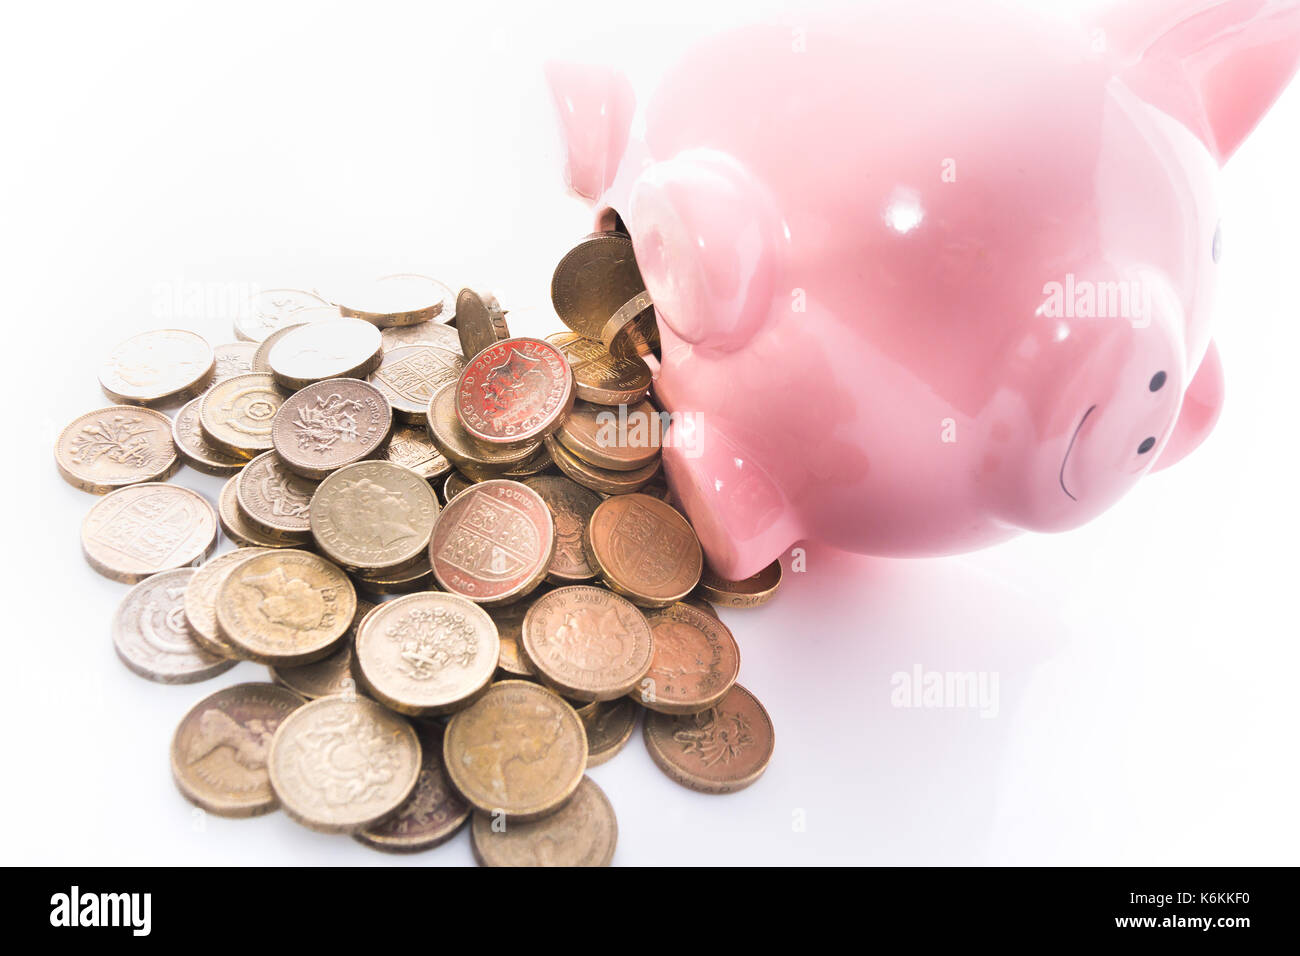 A pile of old pound coins falling out a piggy bank. Stock Photo